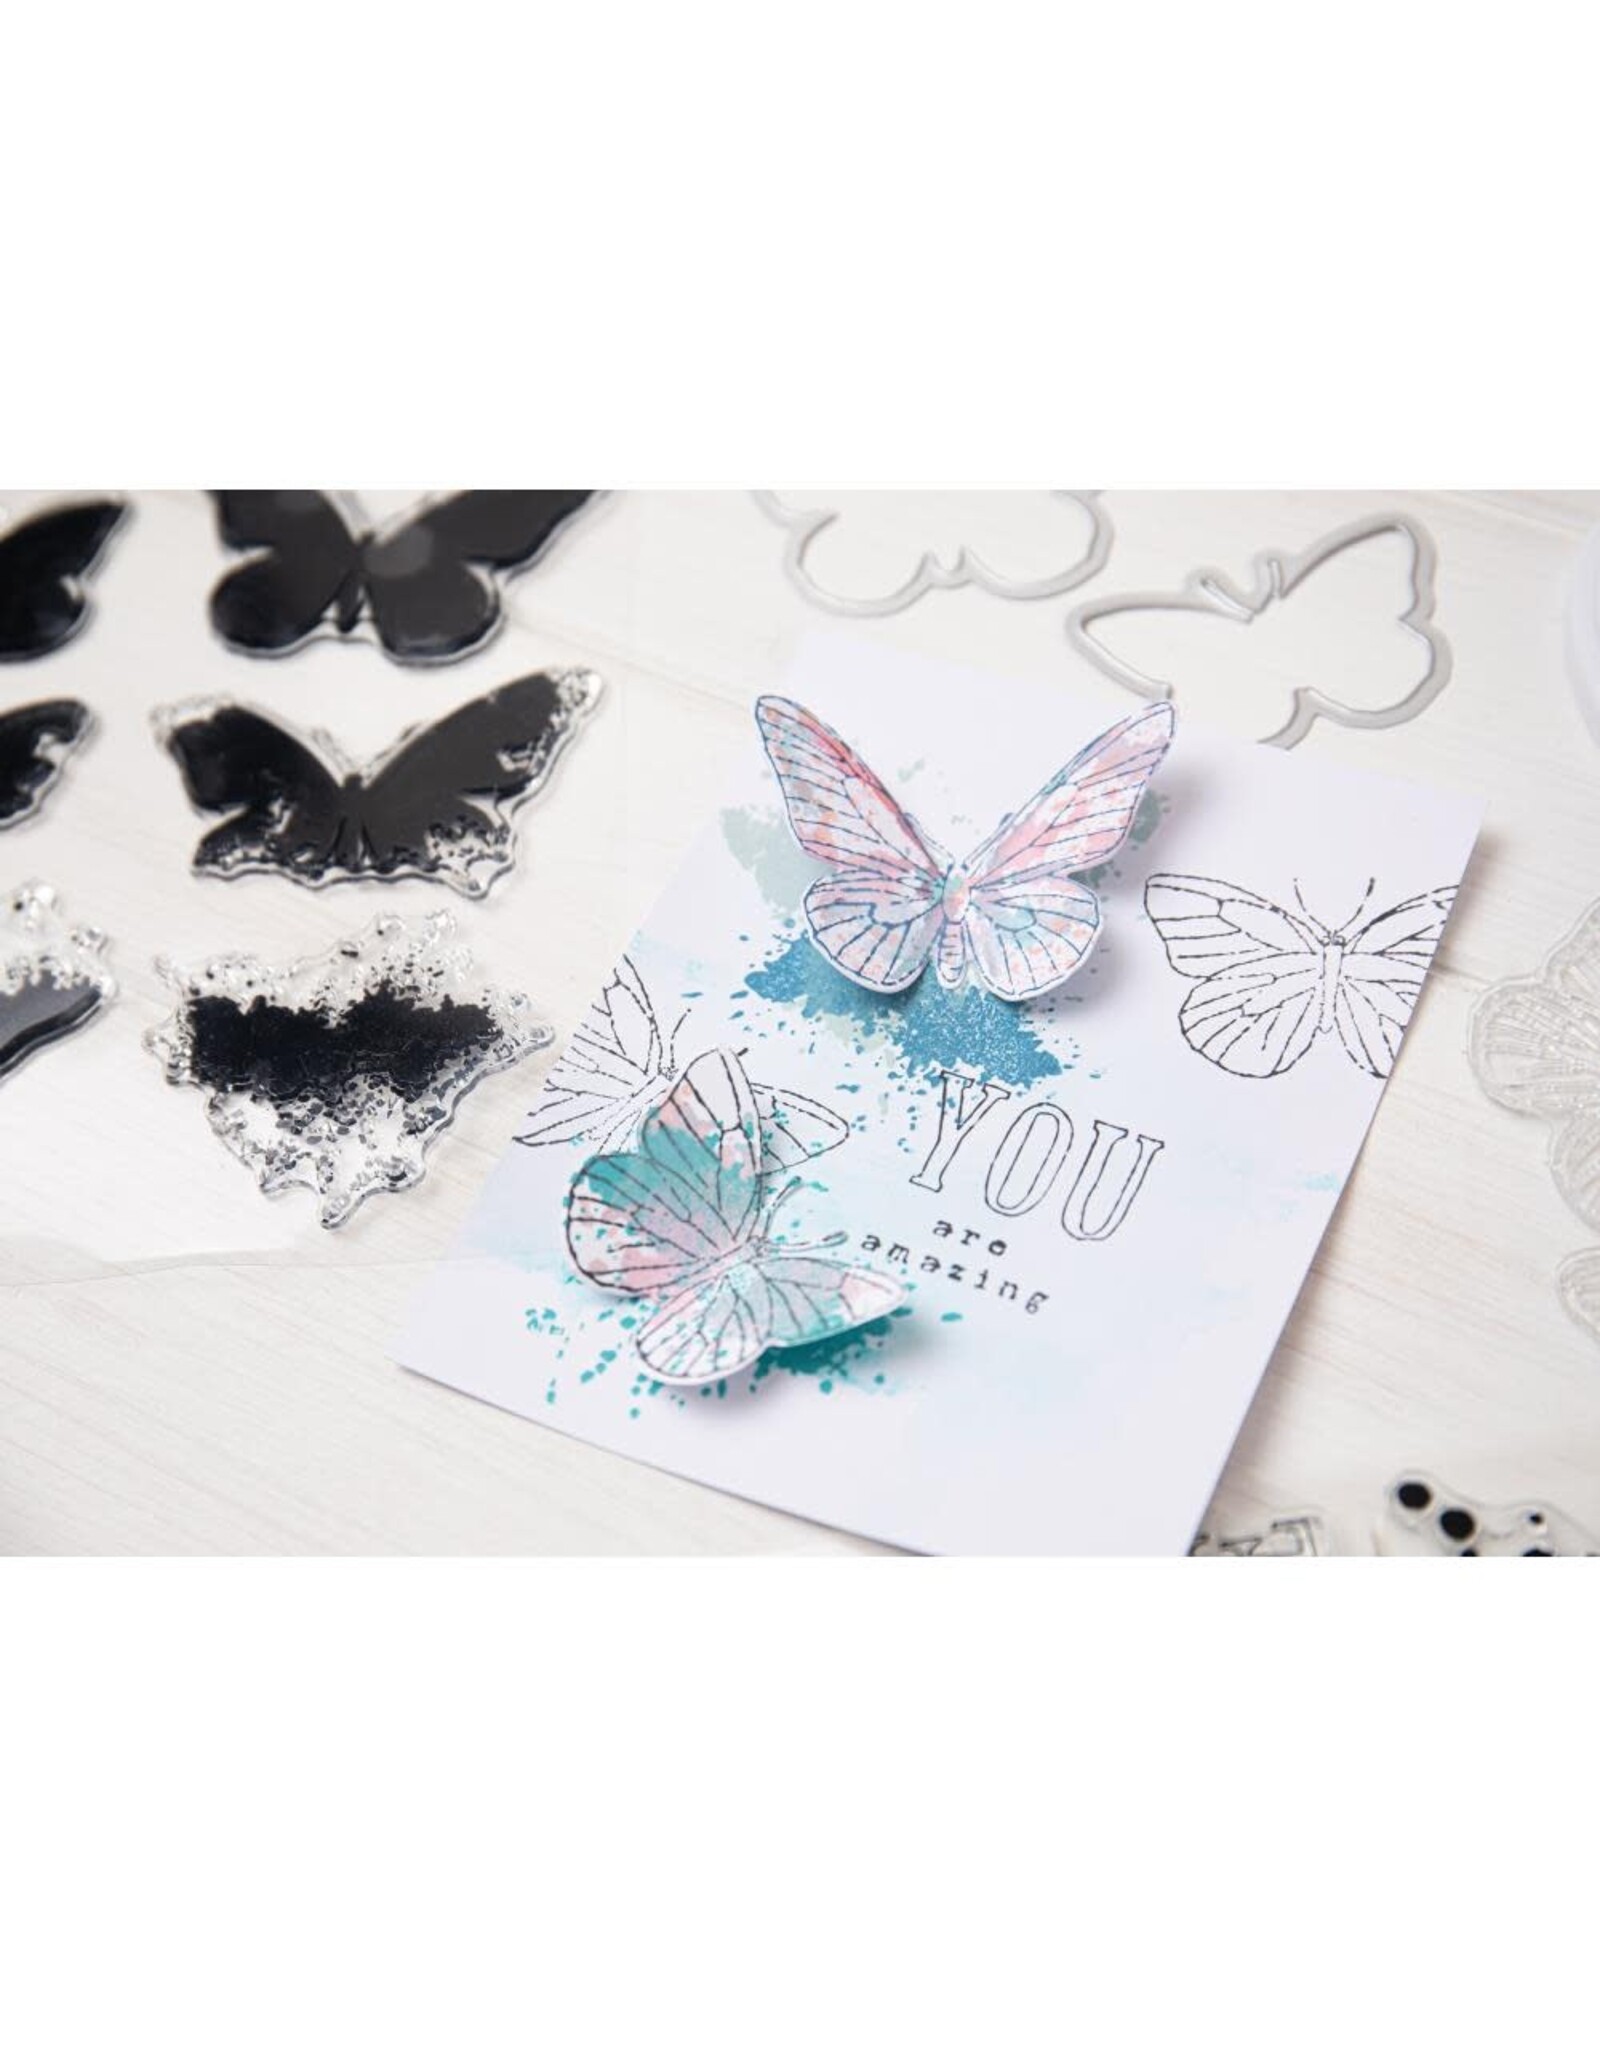 SIZZIX SIZZIX 49 AND MARKET PAINTED PENCIL BUTTERFLIES FRAMELITS DIE AND A5 CLEAR STAMP SET